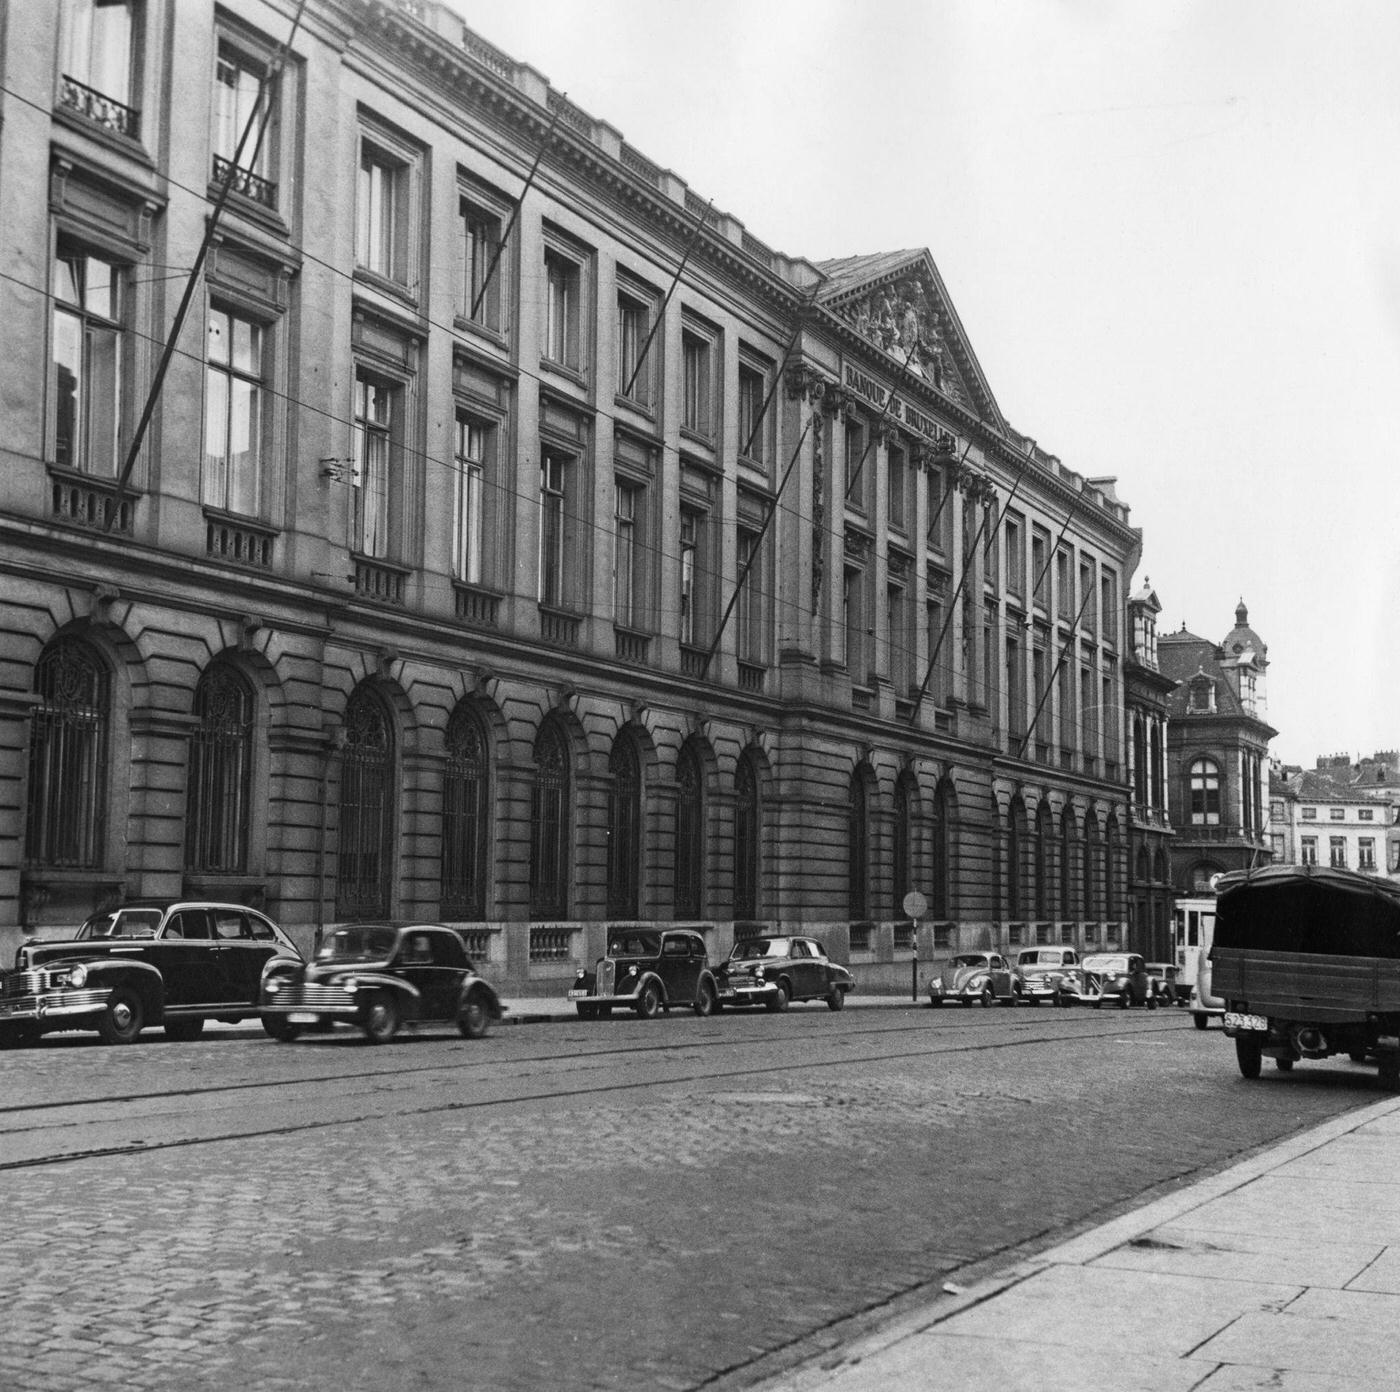 The Banque de Bruxelles or Bank of Brussels in Brussels, 1950.